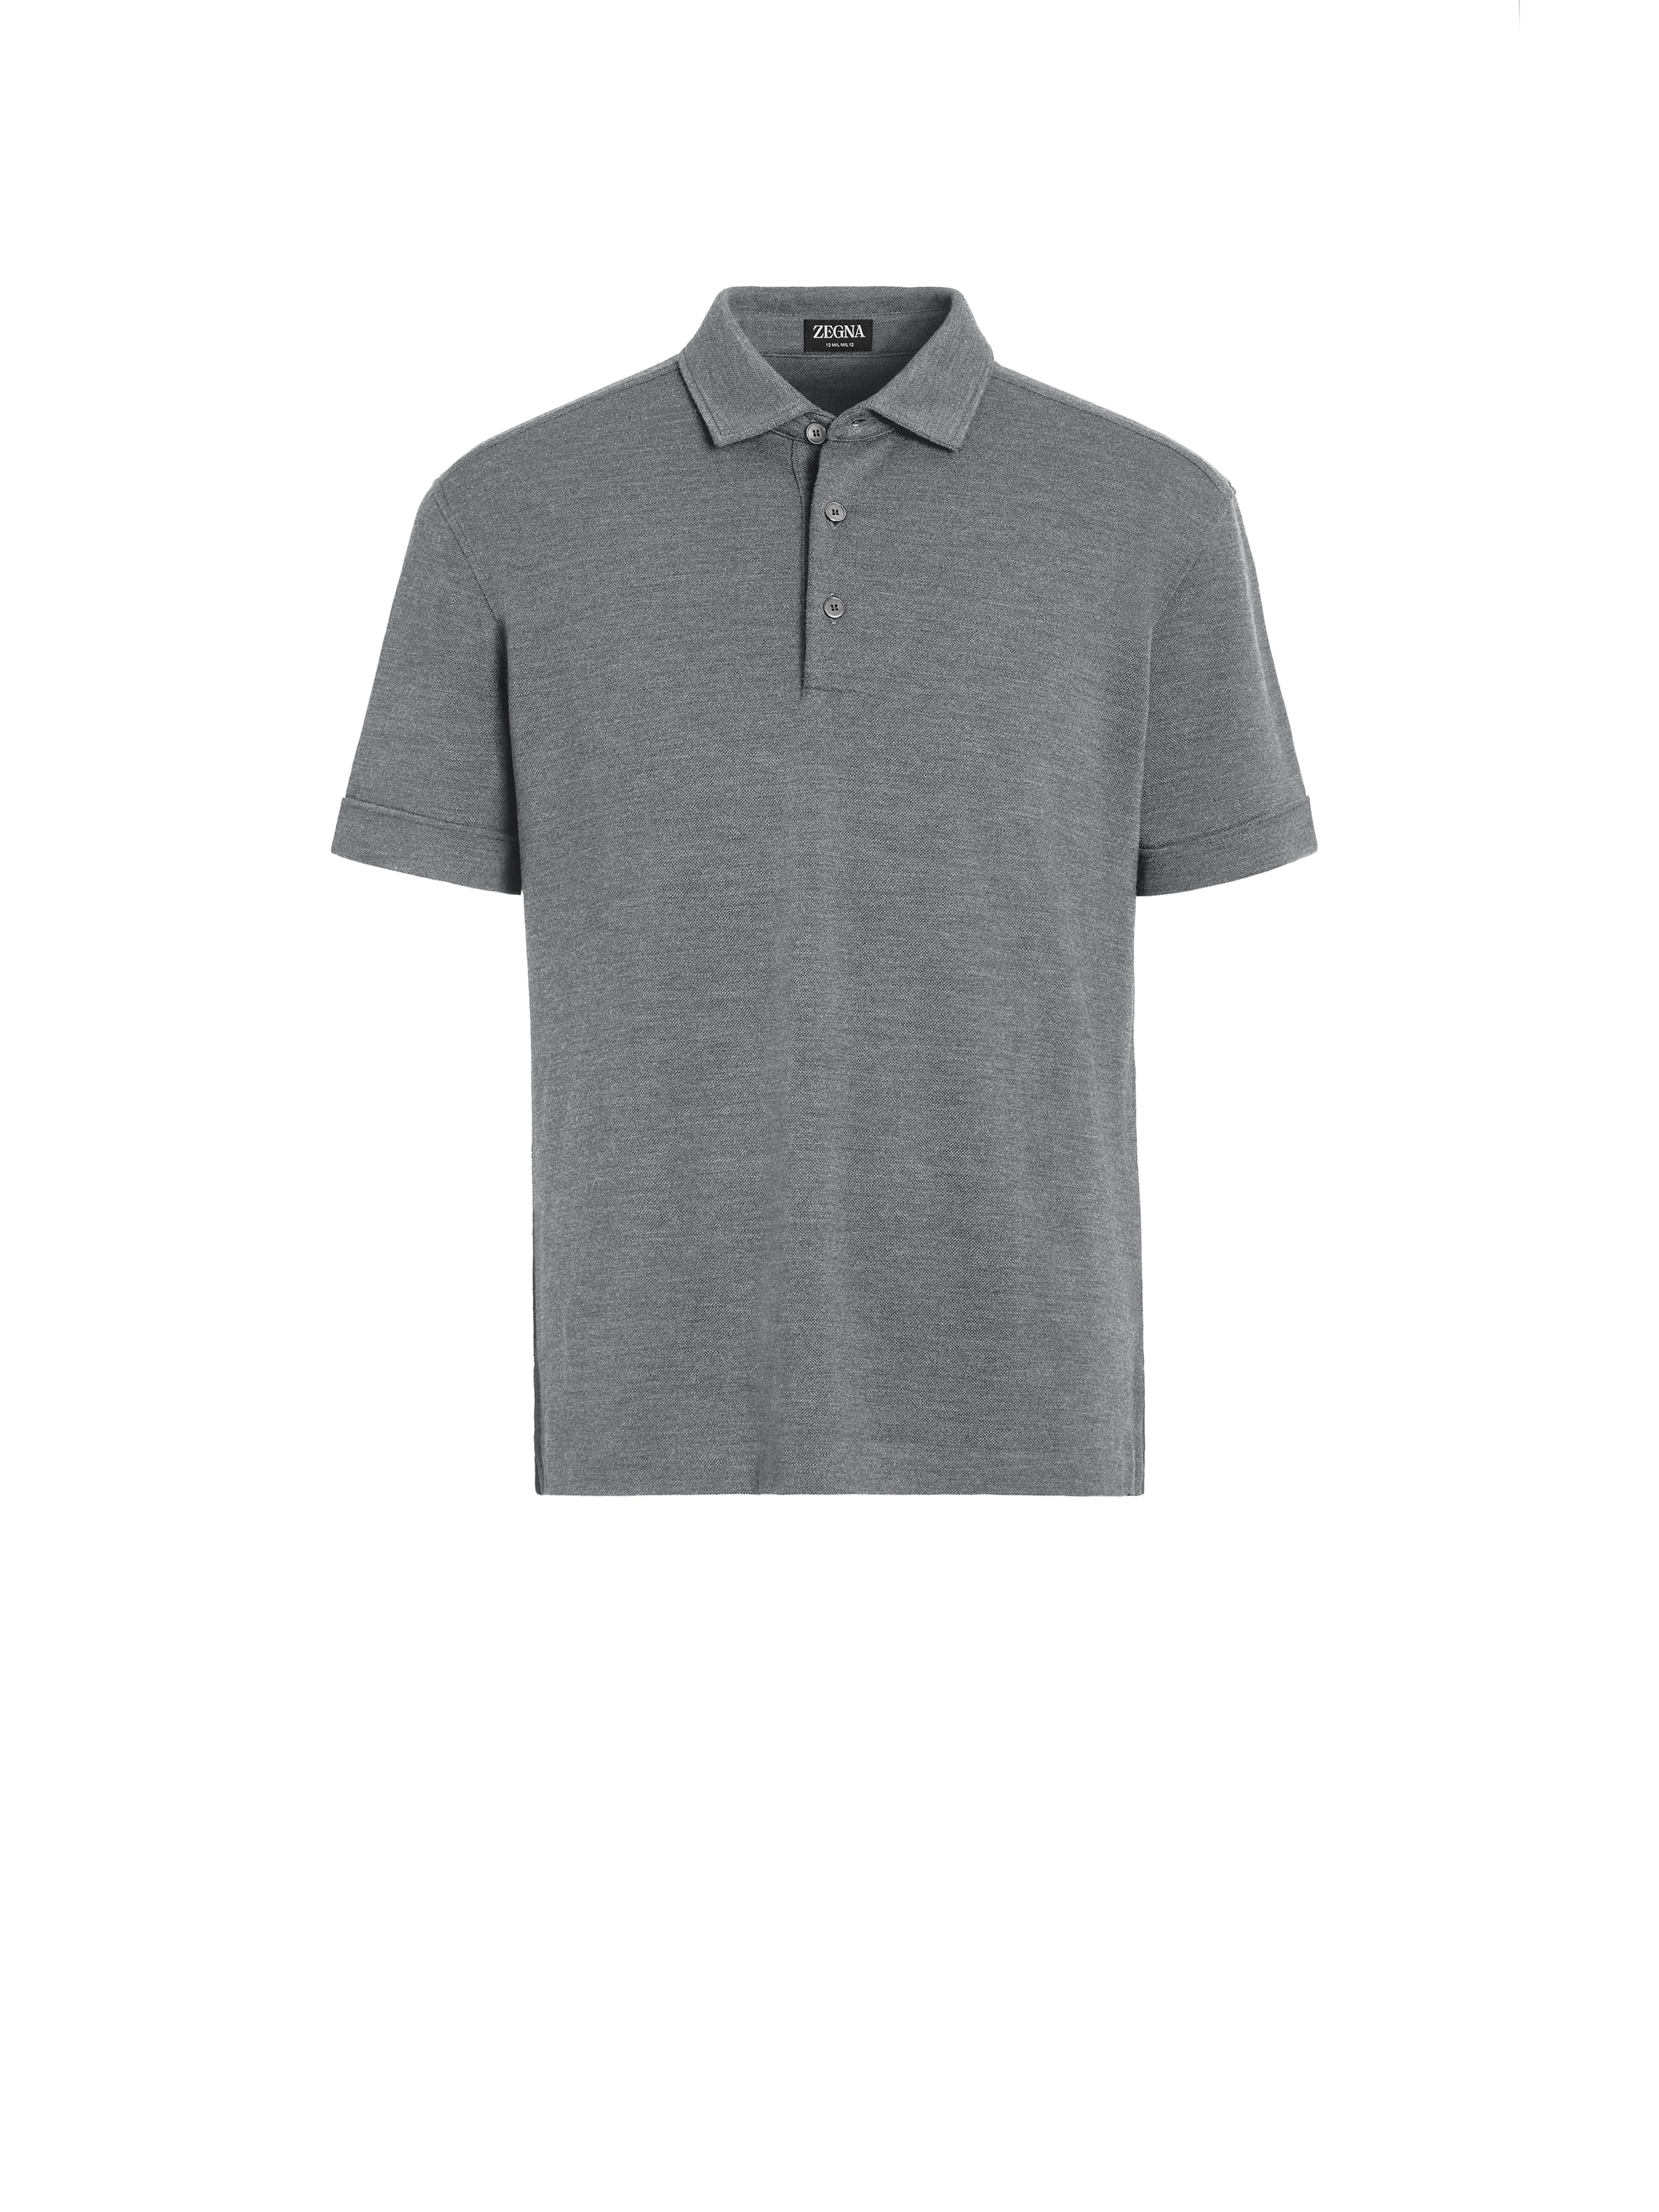 Zegna Poloshirt Aus 12milmil12 Wolle In Meliertem Grau In Gris Chiné